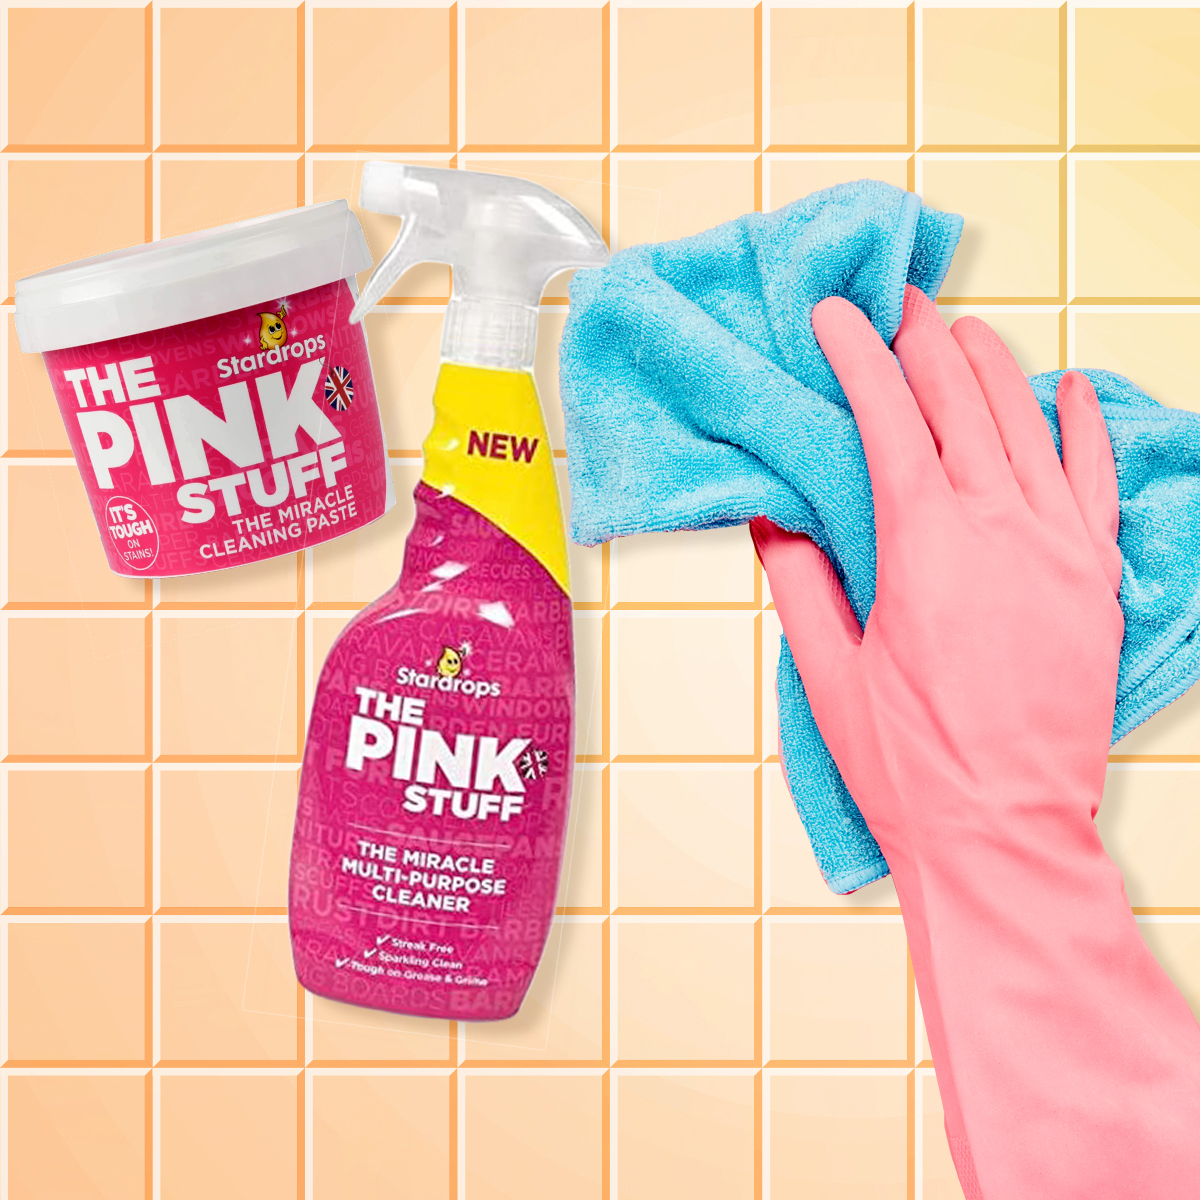 Stardrops The Pink Stuff Miracle Multi-Purpose Cleaning Spray 750 ML + Wash  Cloth, 2 Piece Set